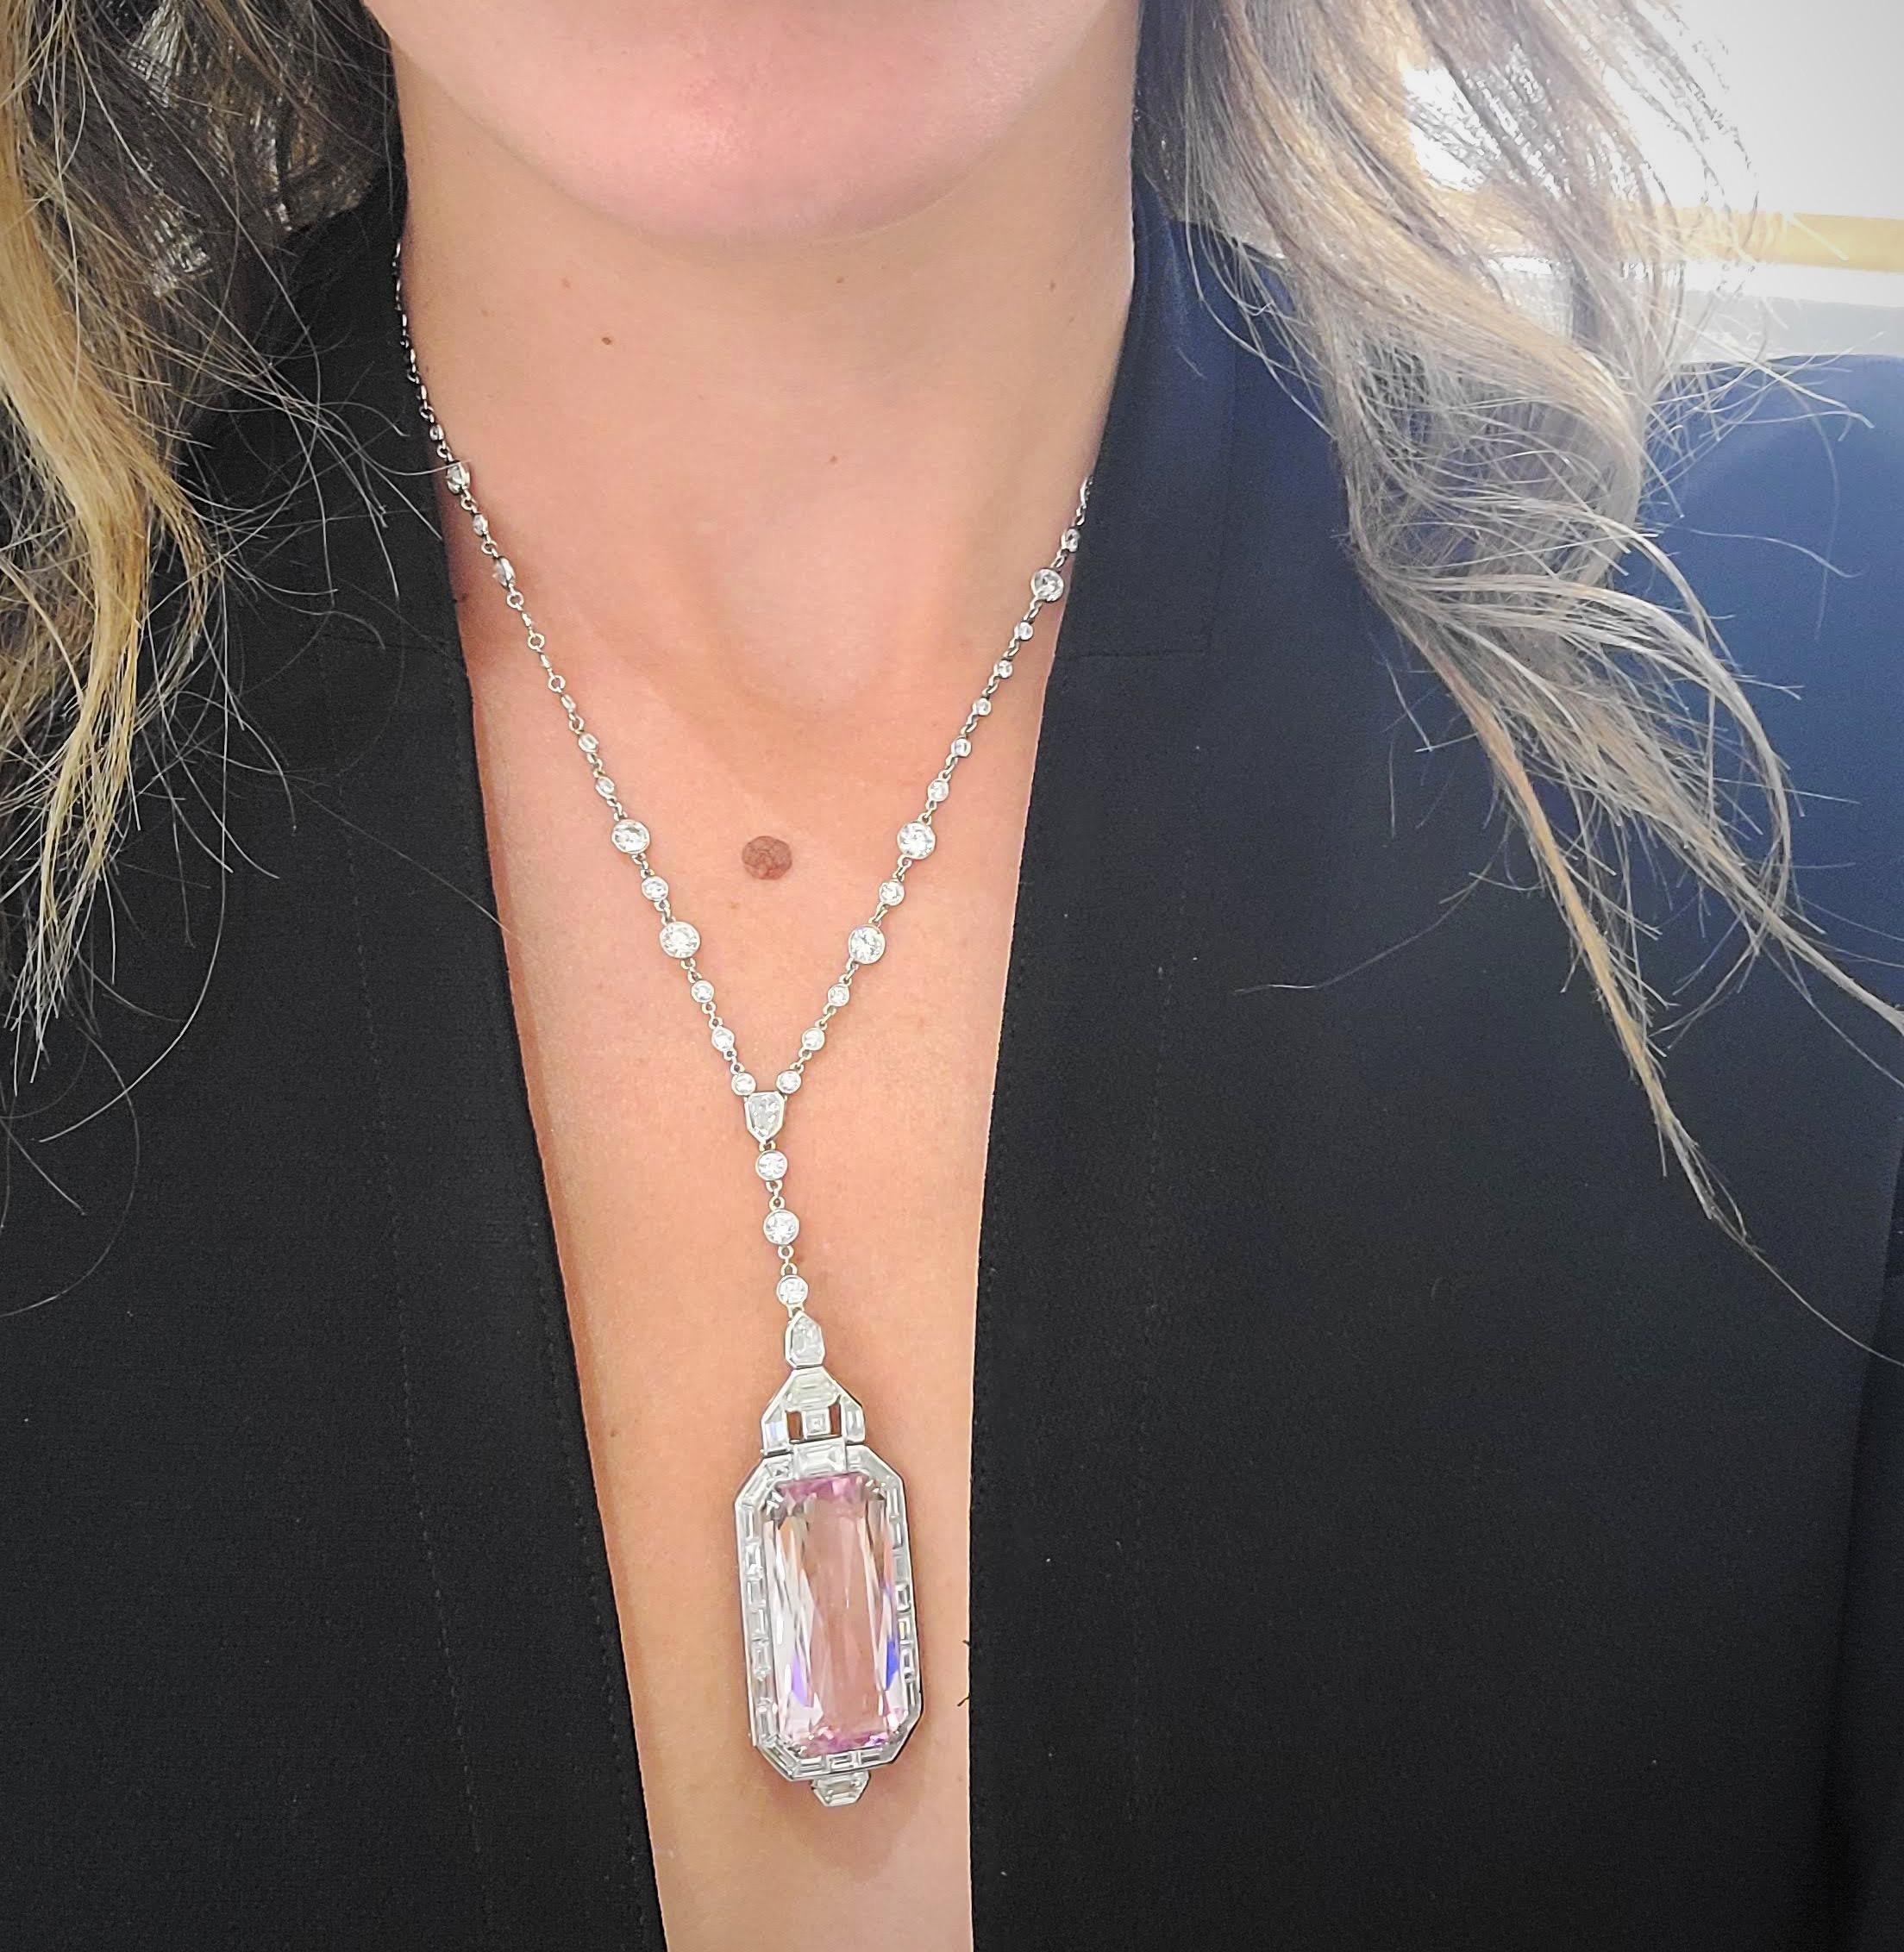 Known best for old world craftsmanship, Hammerman Brothers is a  75 year old company which remains American made.
This magnificent Art Deco-inspired pendant is the perfect example of their extraordinary workmanship. The platinum deco style pendant